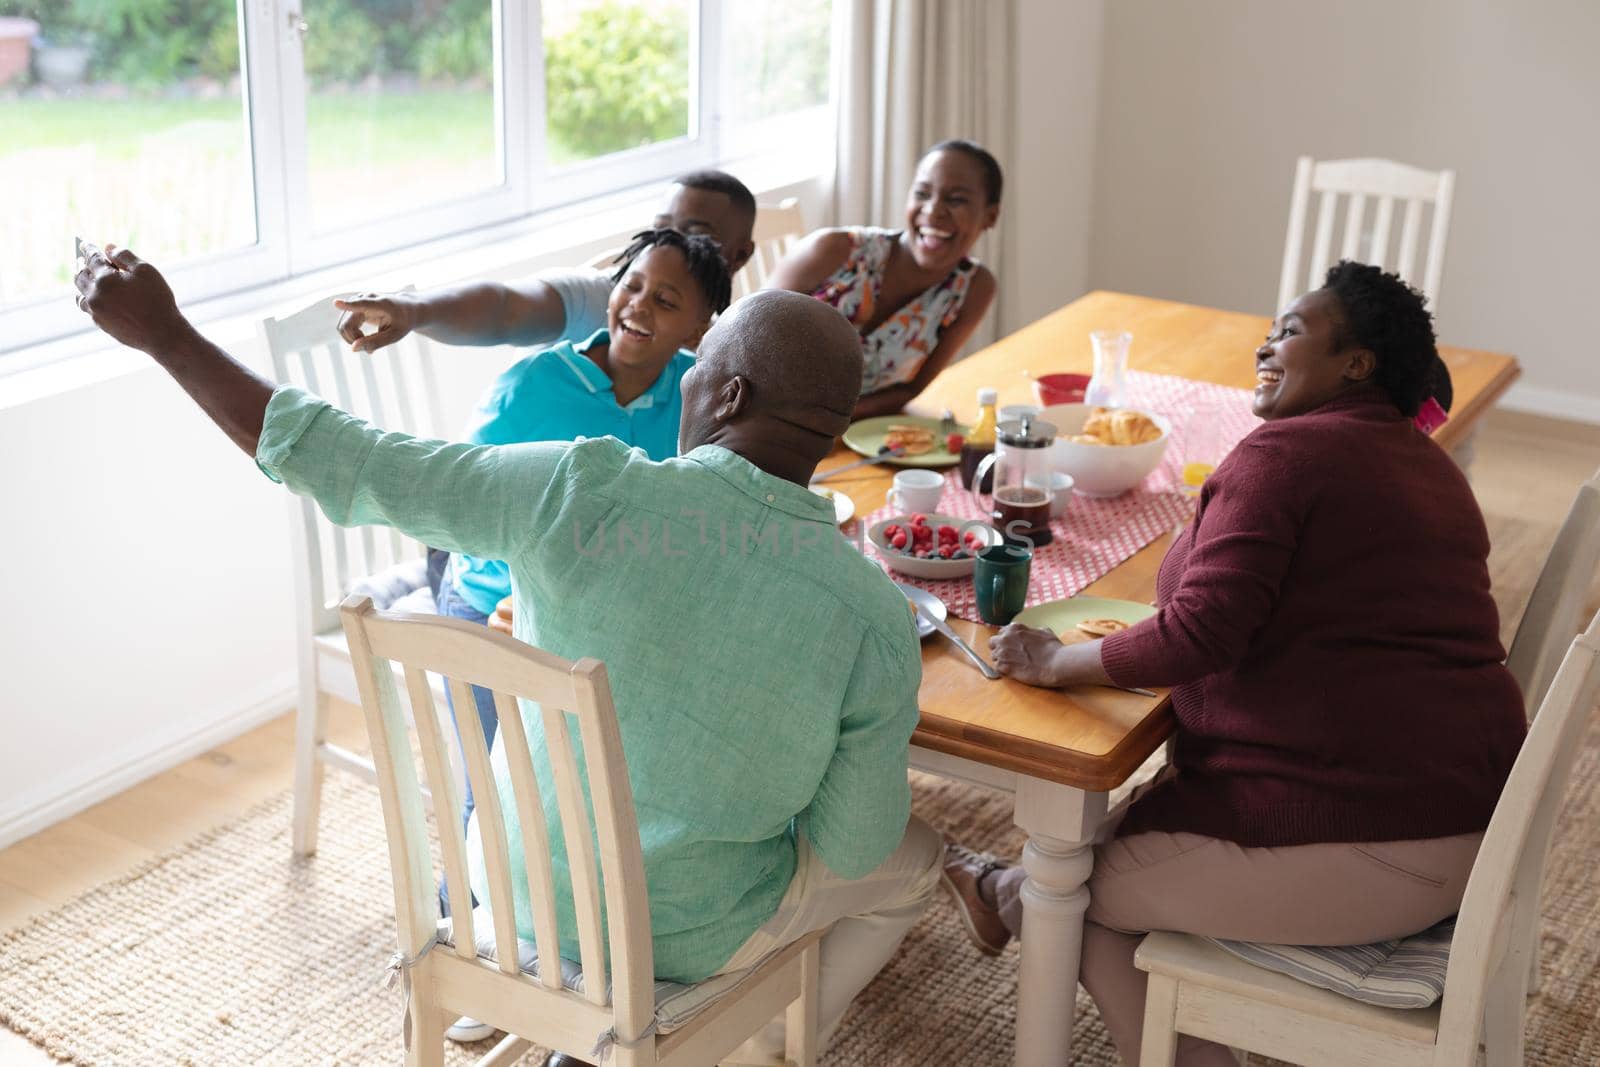 African american grandfather taking selfie with grandchildren and their parents at family meal. three generation family spending quality time together.